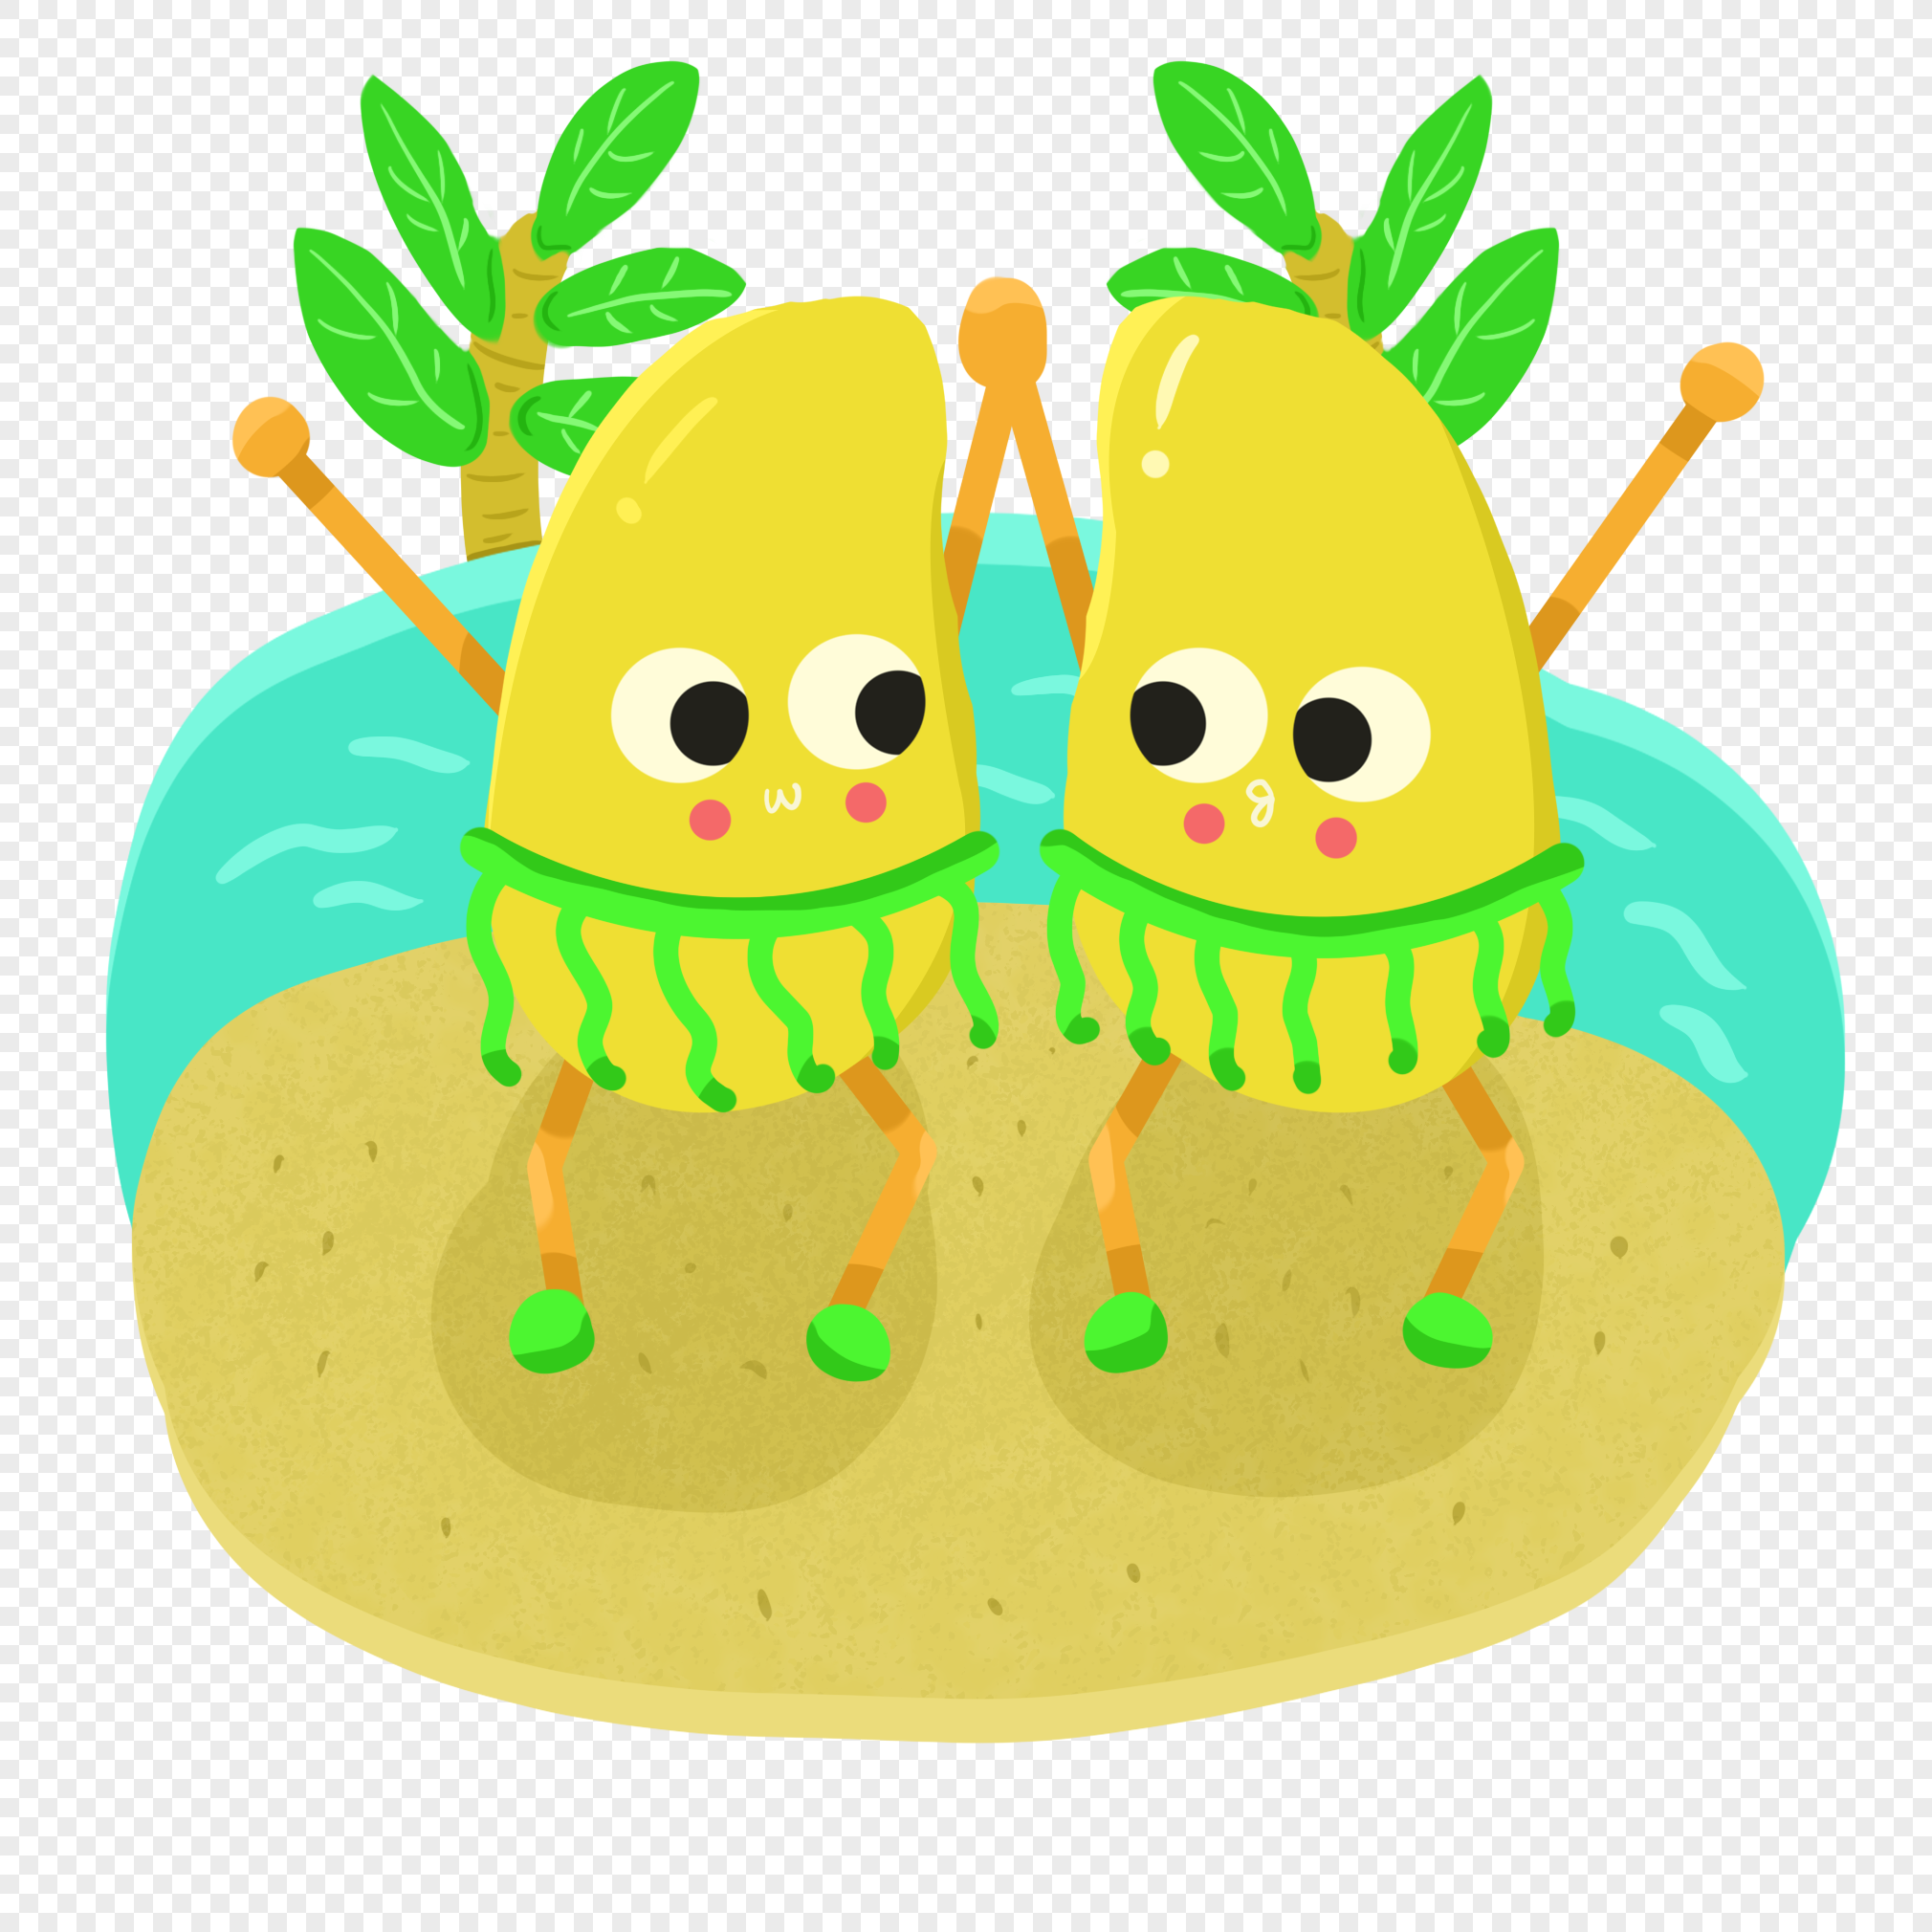 Summer Cartoon Images, HD Pictures For Free Vectors Download 